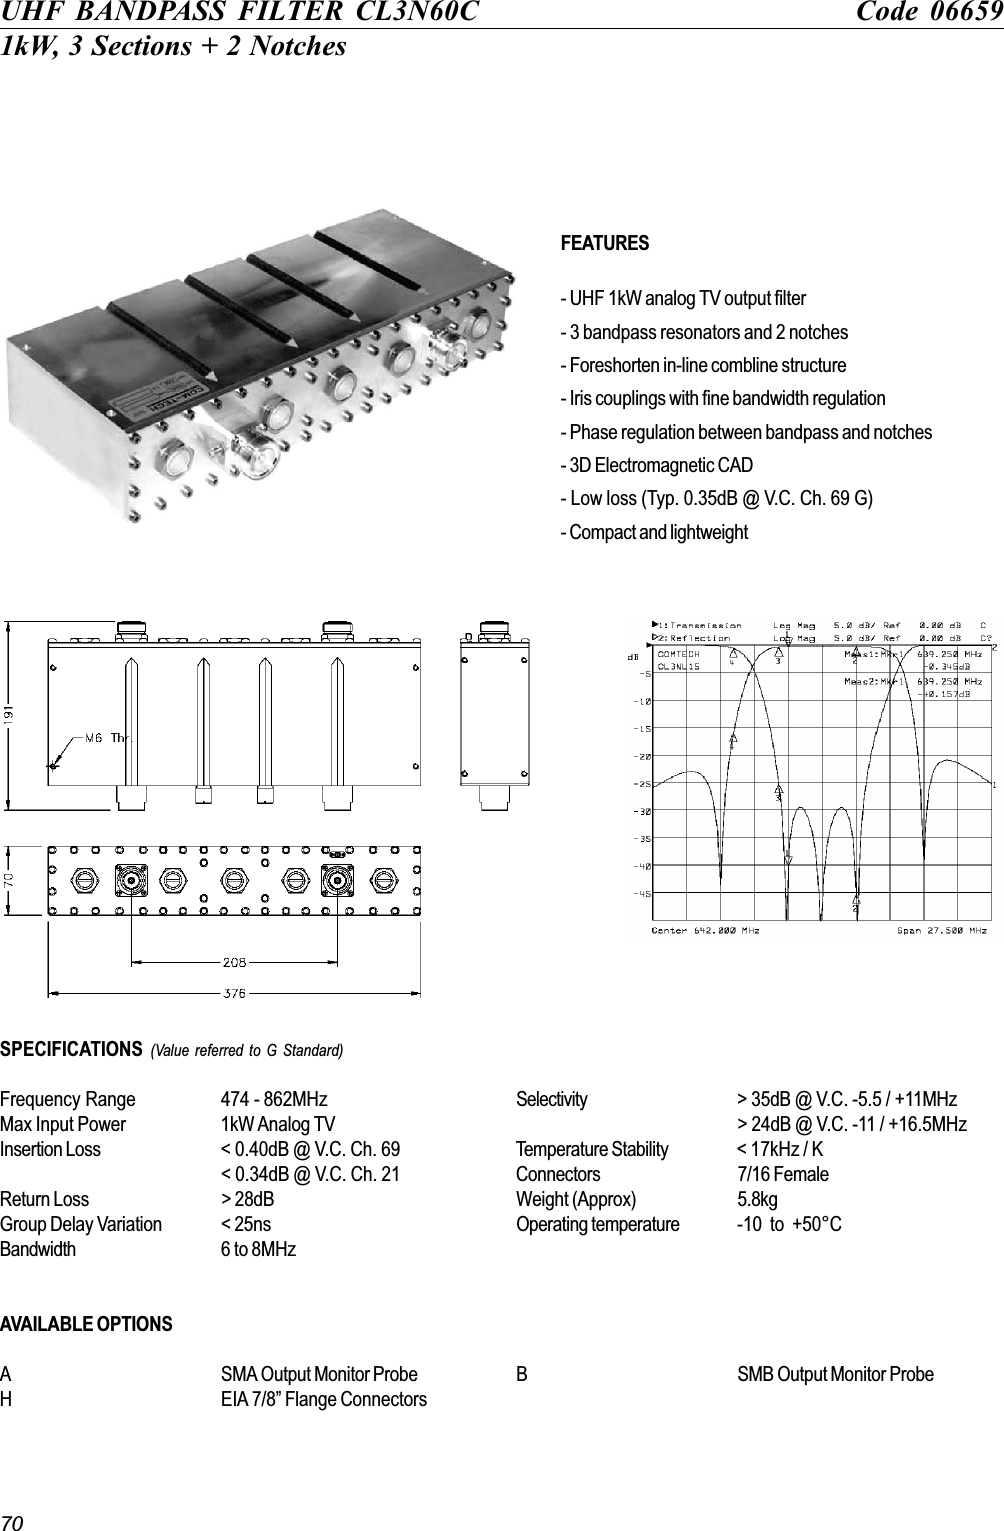 70FEATURES- UHF 1kW analog TV output filter- 3 bandpass resonators and 2 notches- Foreshorten in-line combline structure- Iris couplings with fine bandwidth regulation- Phase regulation between bandpass and notches- 3D Electromagnetic CAD- Low loss (Typ. 0.35dB @ V.C. Ch. 69 G)- Compact and lightweightSPECIFICATIONS  (Value referred to G Standard)Frequency Range 474 - 862MHz Selectivity &gt; 35dB @ V.C. -5.5 / +11MHzMax Input Power 1kW Analog TV &gt; 24dB @ V.C. -11 / +16.5MHzInsertion Loss &lt; 0.40dB @ V.C. Ch. 69 Temperature Stability &lt; 17kHz / K&lt; 0.34dB @ V.C. Ch. 21 Connectors 7/16 FemaleReturn Loss &gt; 28dB Weight (Approx) 5.8kgGroup Delay Variation &lt; 25ns Operating temperature -10  to  +50°CBandwidth 6 to 8MHzAVAILABLE OPTIONSA SMA Output Monitor Probe B SMB Output Monitor ProbeH EIA 7/8 Flange ConnectorsUHF BANDPASS FILTER CL3N60C Code 066591kW, 3 Sections + 2 Notches